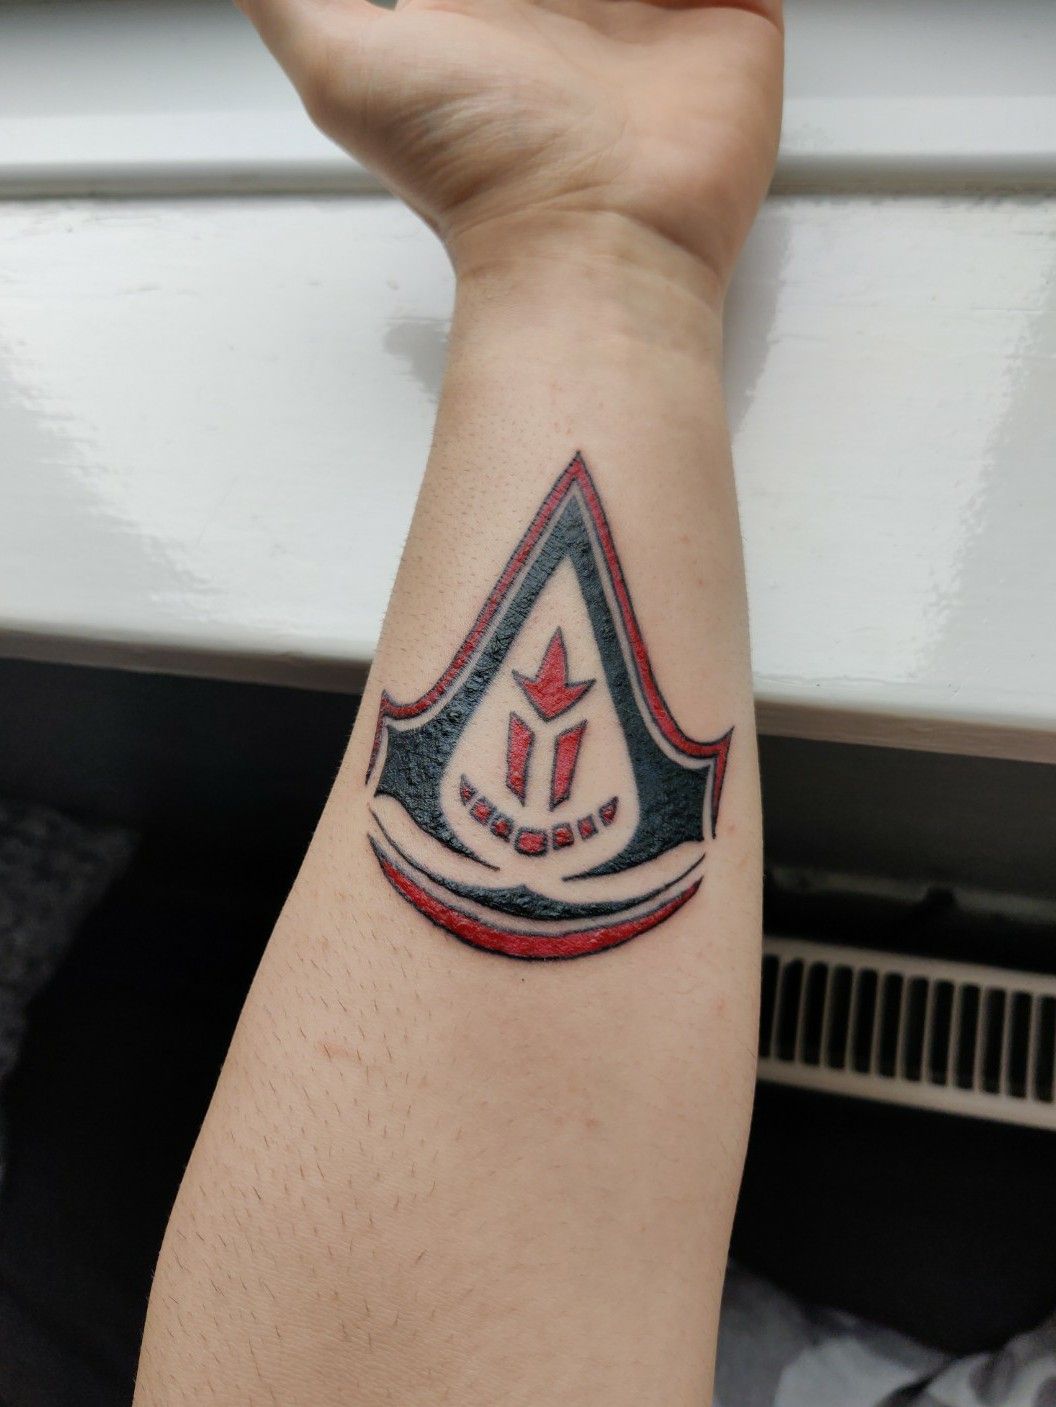 Wanted to share a gaming tattoo I got yesterday The Assassins Creed logo  with added watercolour effect  rgaming